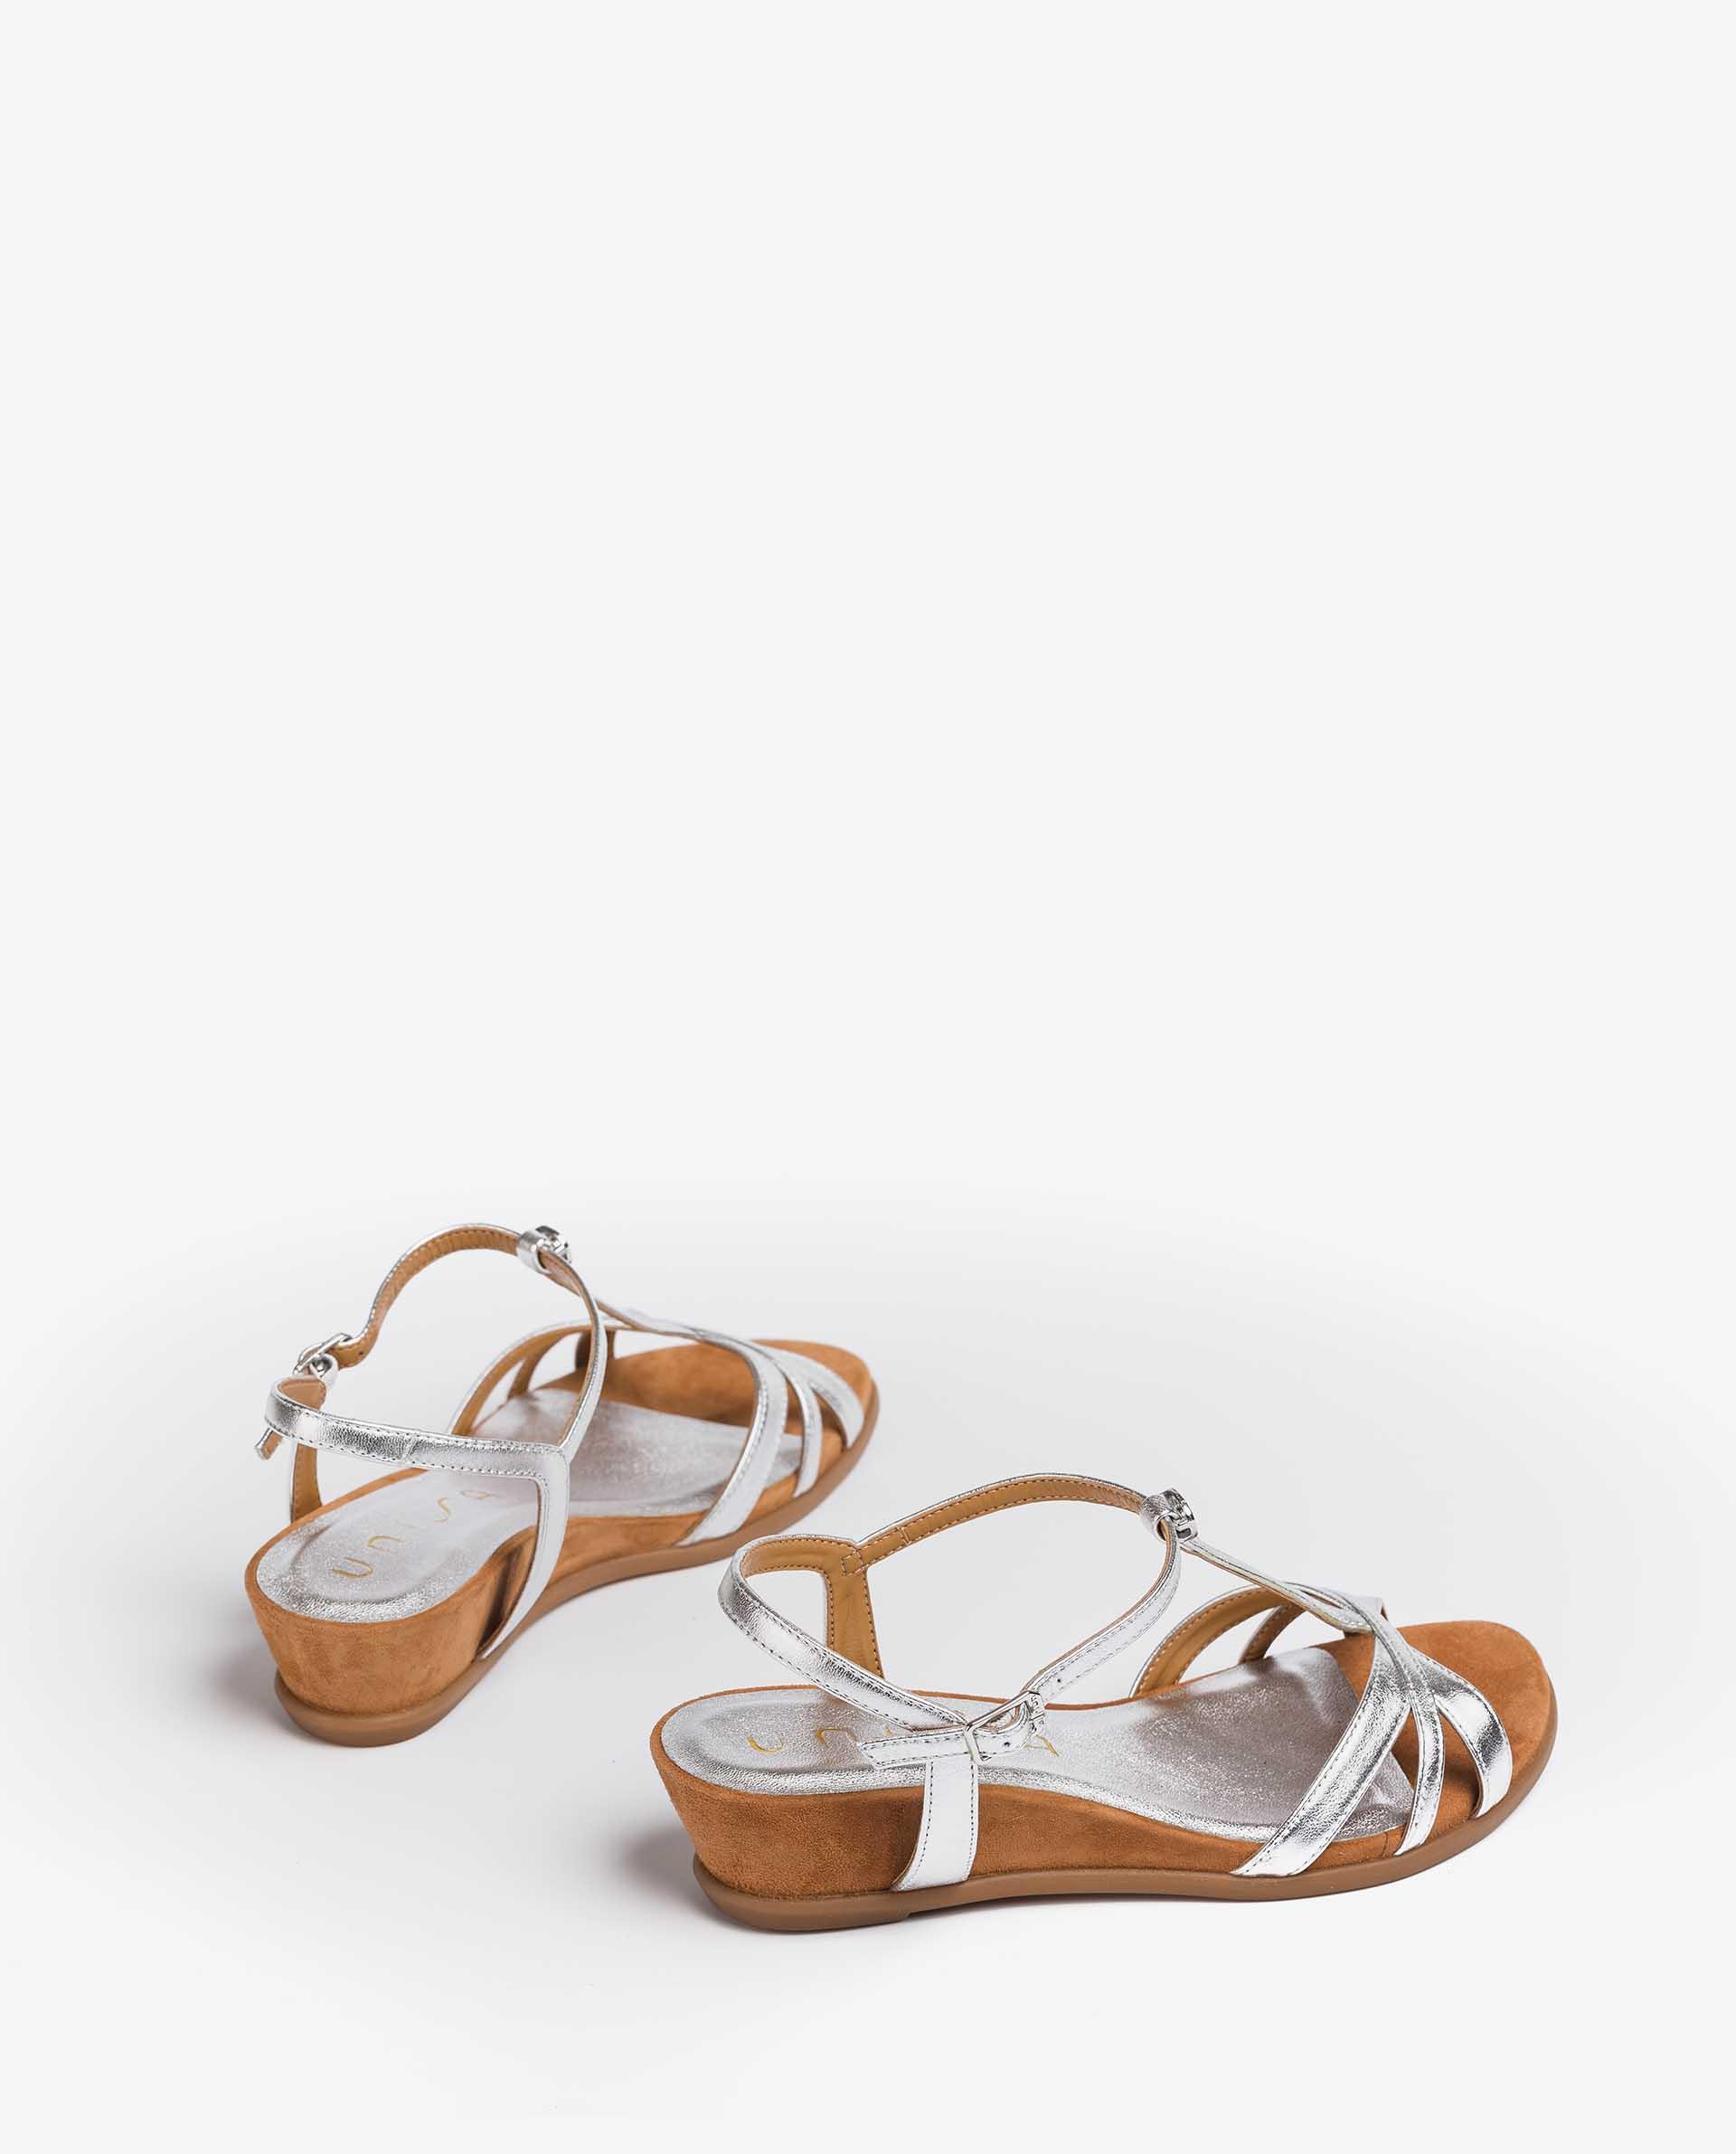 UNISA T-strap sandals with metal effect leather straps BINAR_21_LMT 2